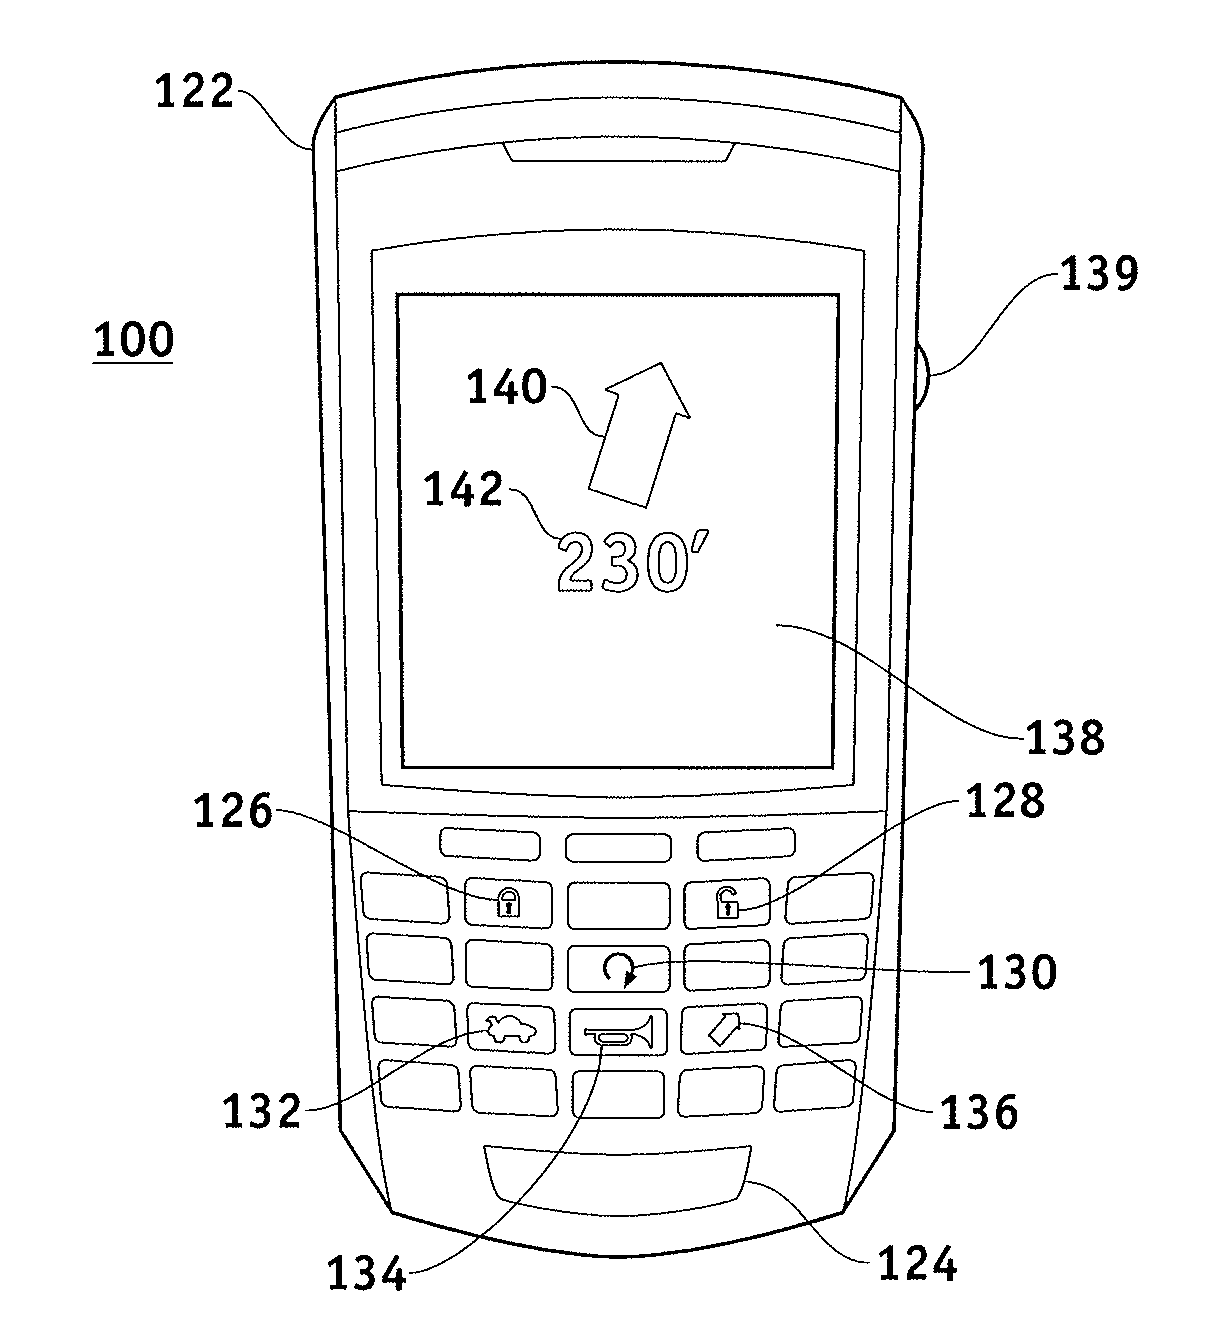 Parked Vehicle Location Information Access via a Portable Cellular Communication Device